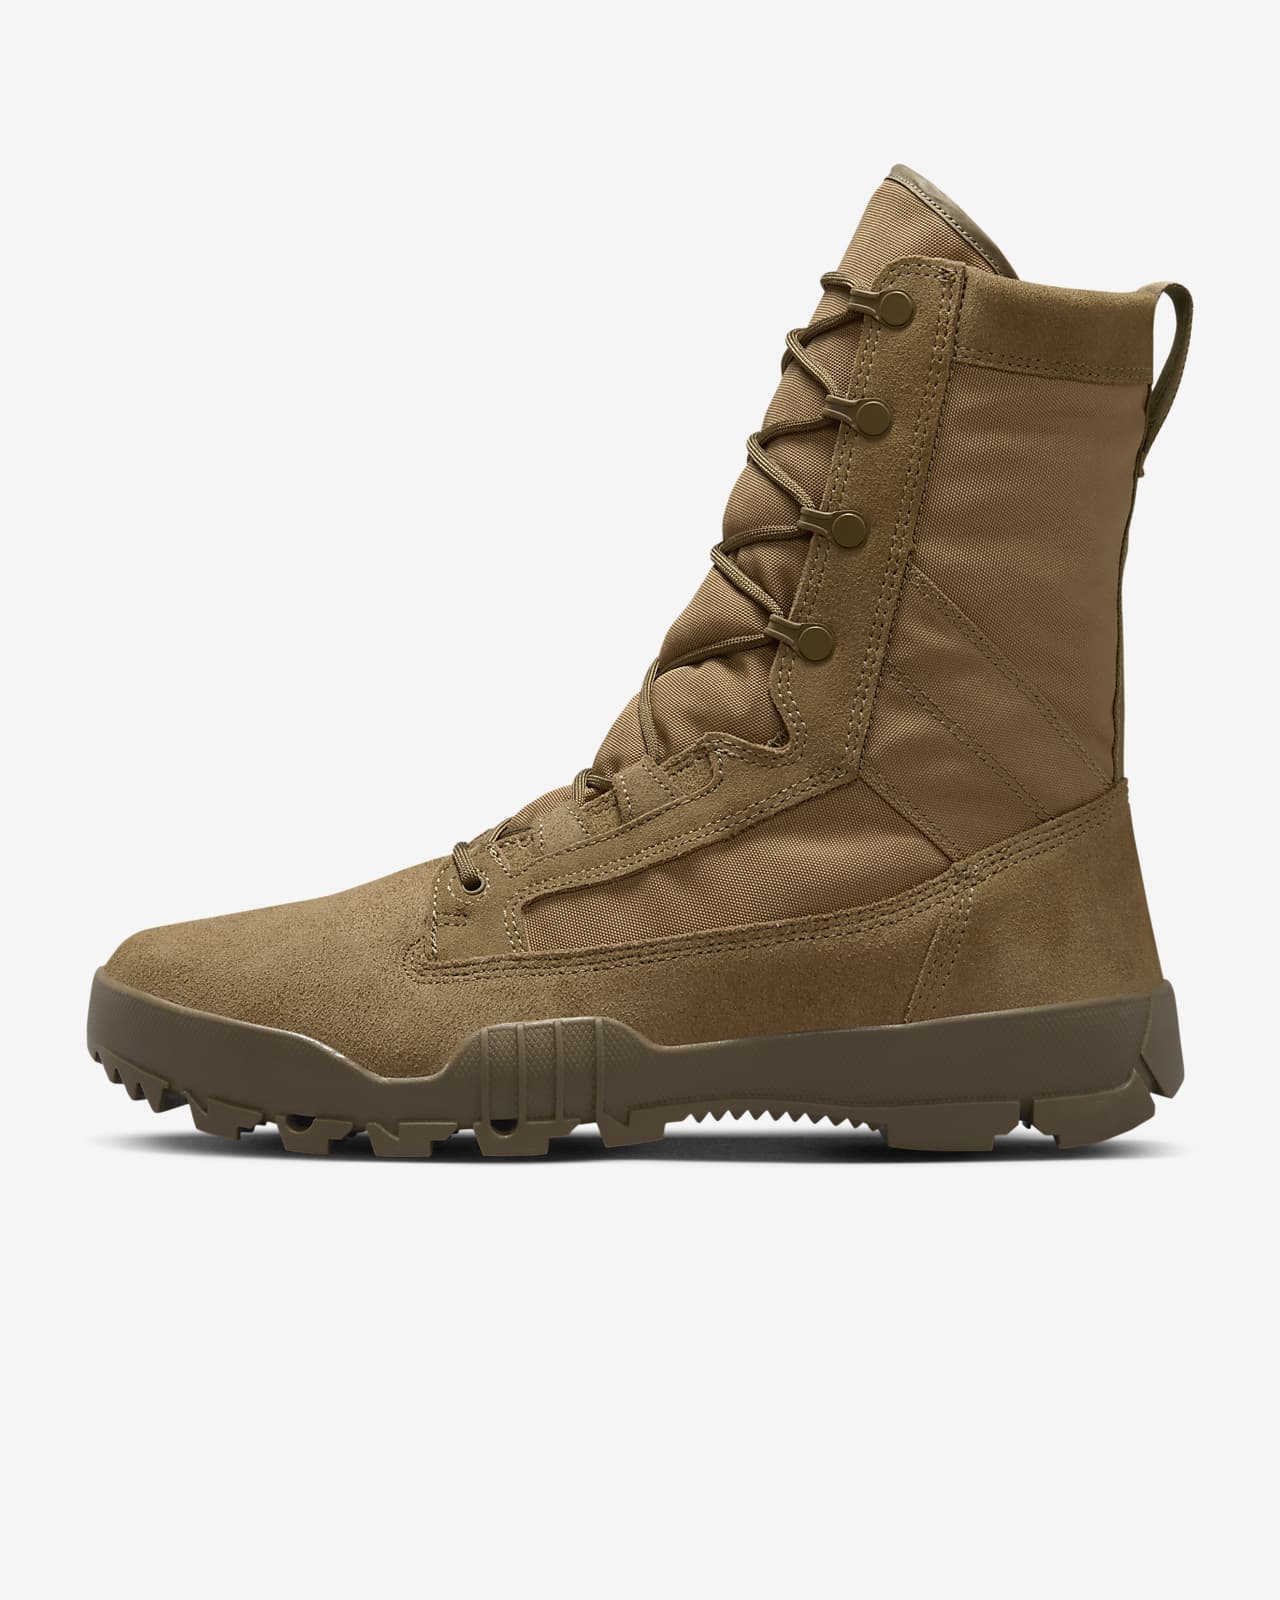 Abe hellige offentliggøre Nike SFB Jungle 8" Leather Tactical Boots. Nike.com